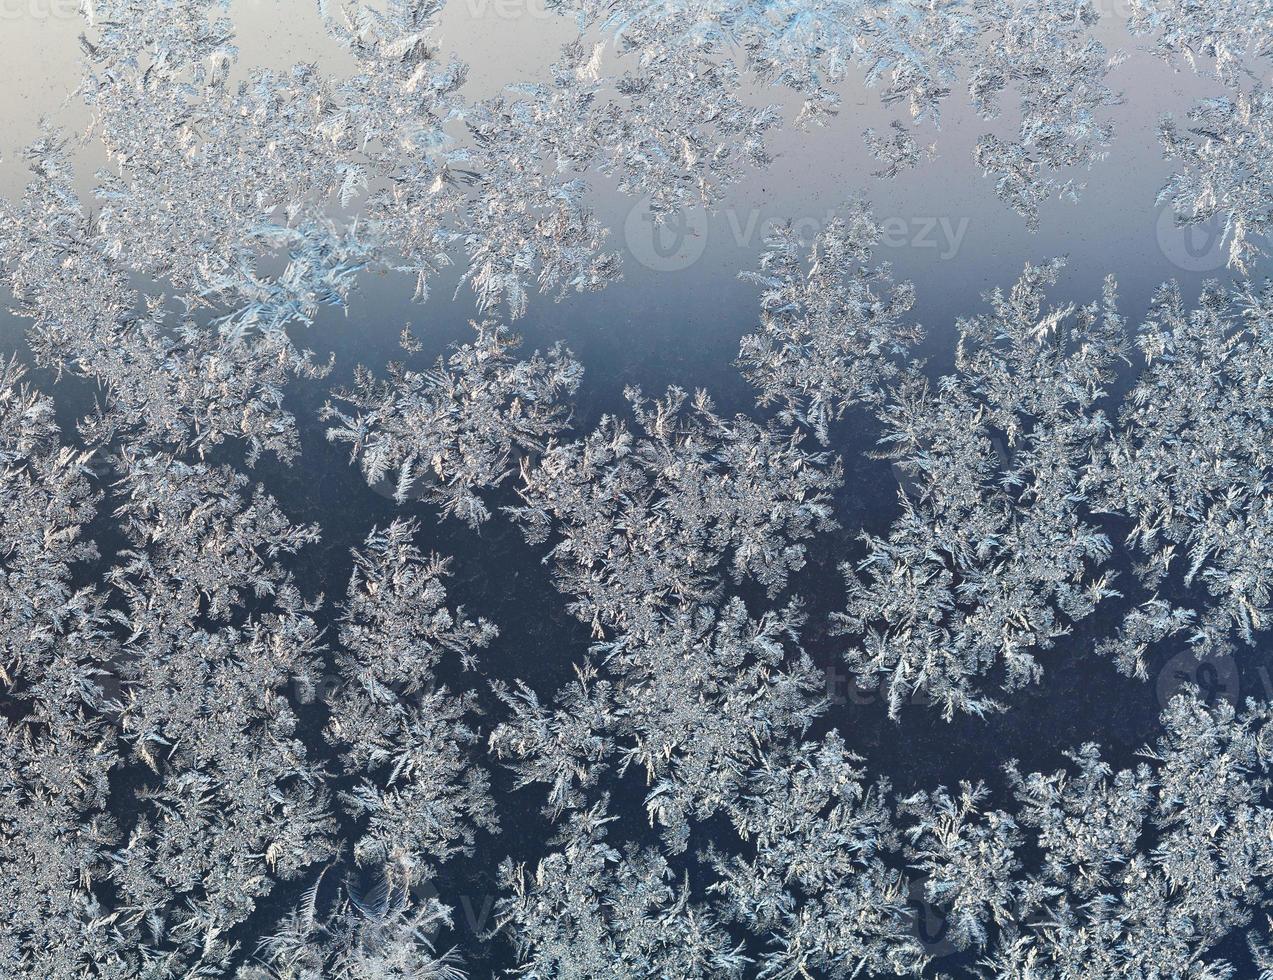 snowflakes on windowpane at early winter dawn photo